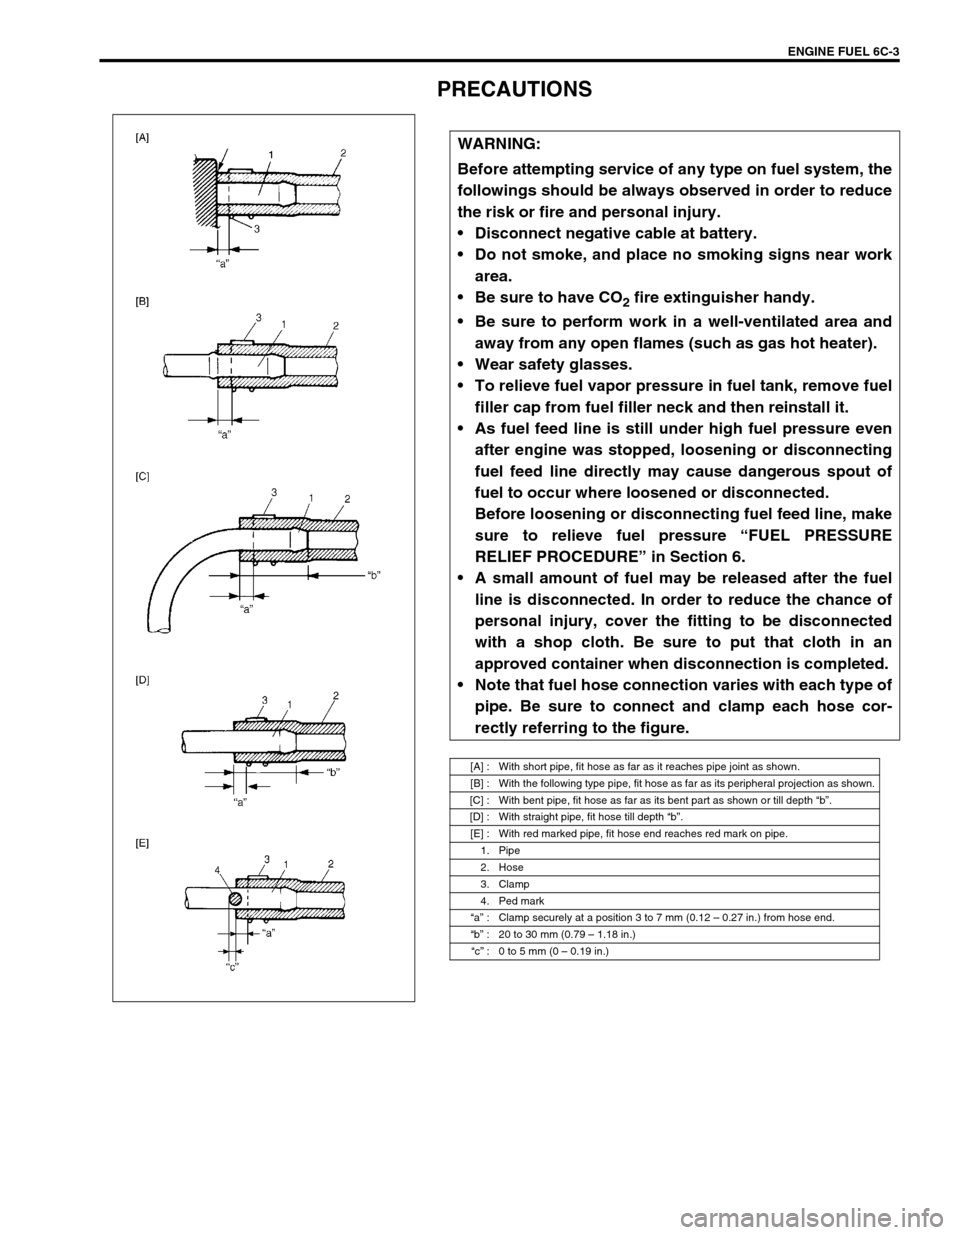 SUZUKI SWIFT 2000 1.G RG413 Service Workshop Manual ENGINE FUEL 6C-3
PRECAUTIONS
WARNING:
Before attempting service of any type on fuel system, the
followings should be always observed in order to reduce
the risk or fire and personal injury.
Disconnec